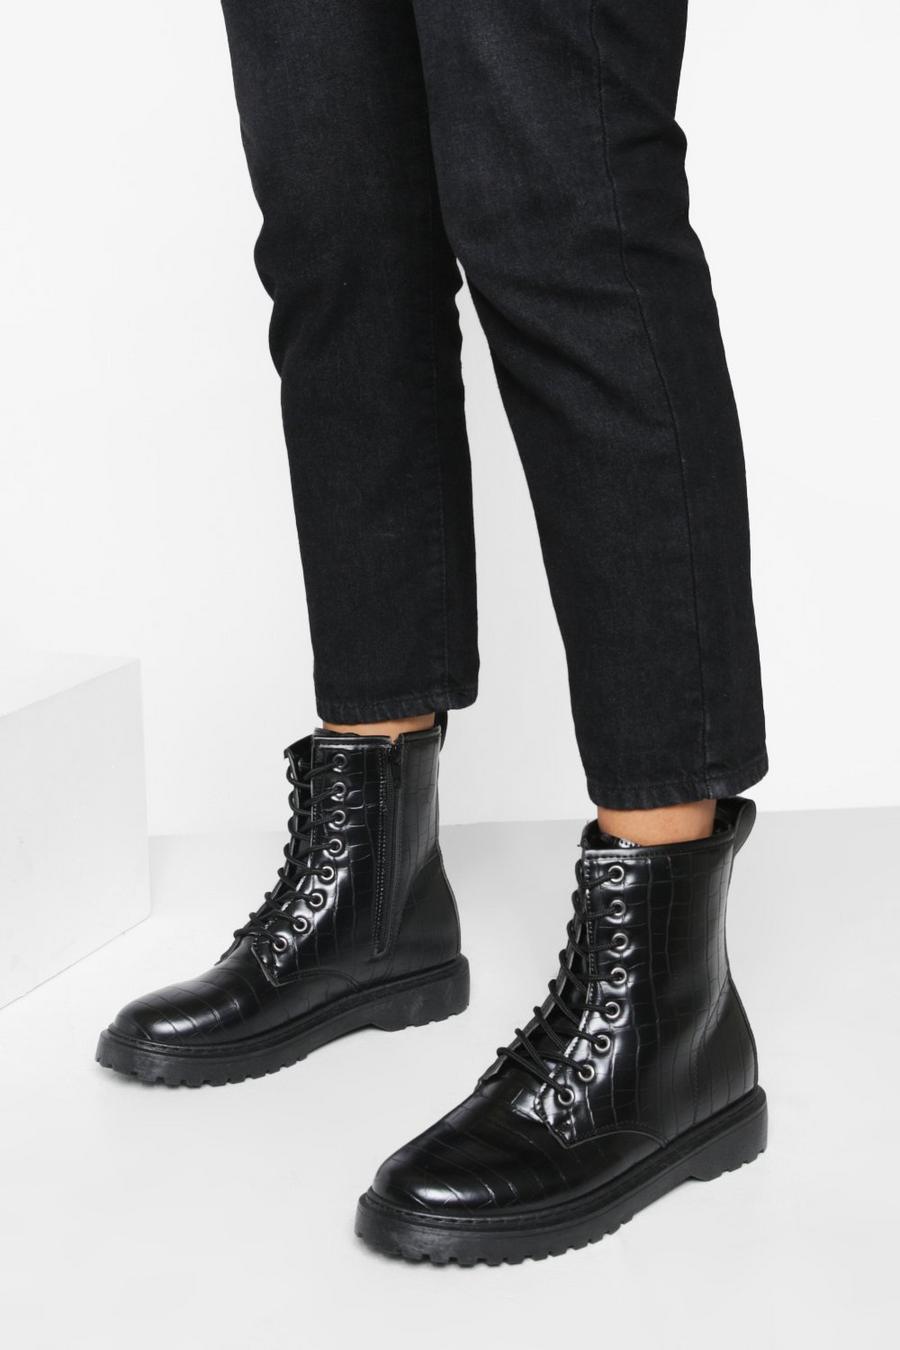 Black nero Croc Lace Up Chunky Hiker Boots